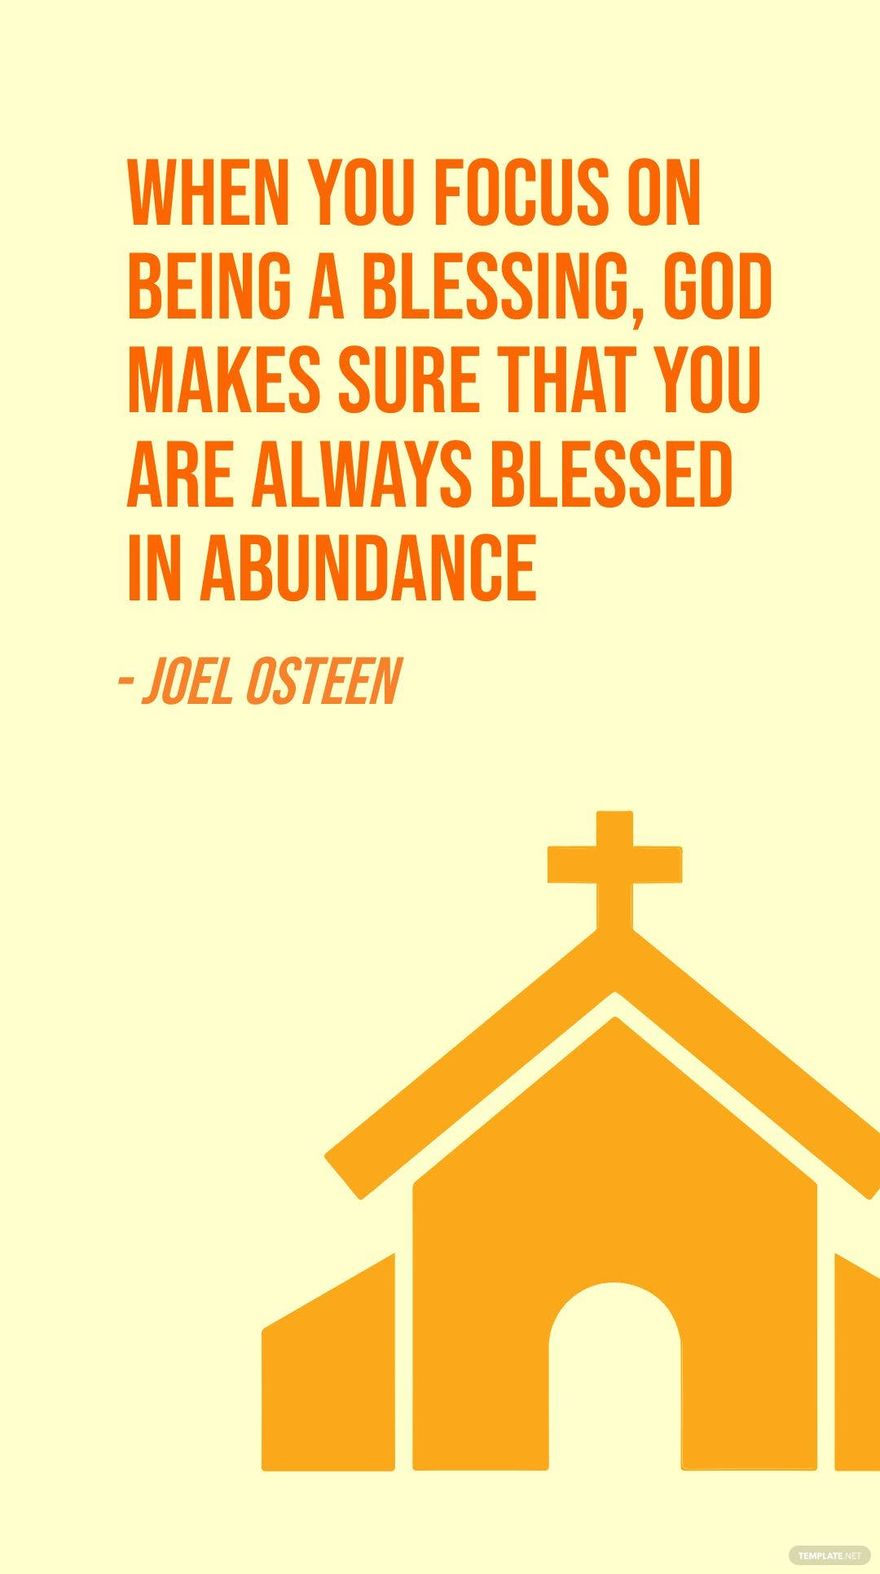 Joel Osteen - When you focus on being a blessing, God makes sure that you are always blessed in abundance